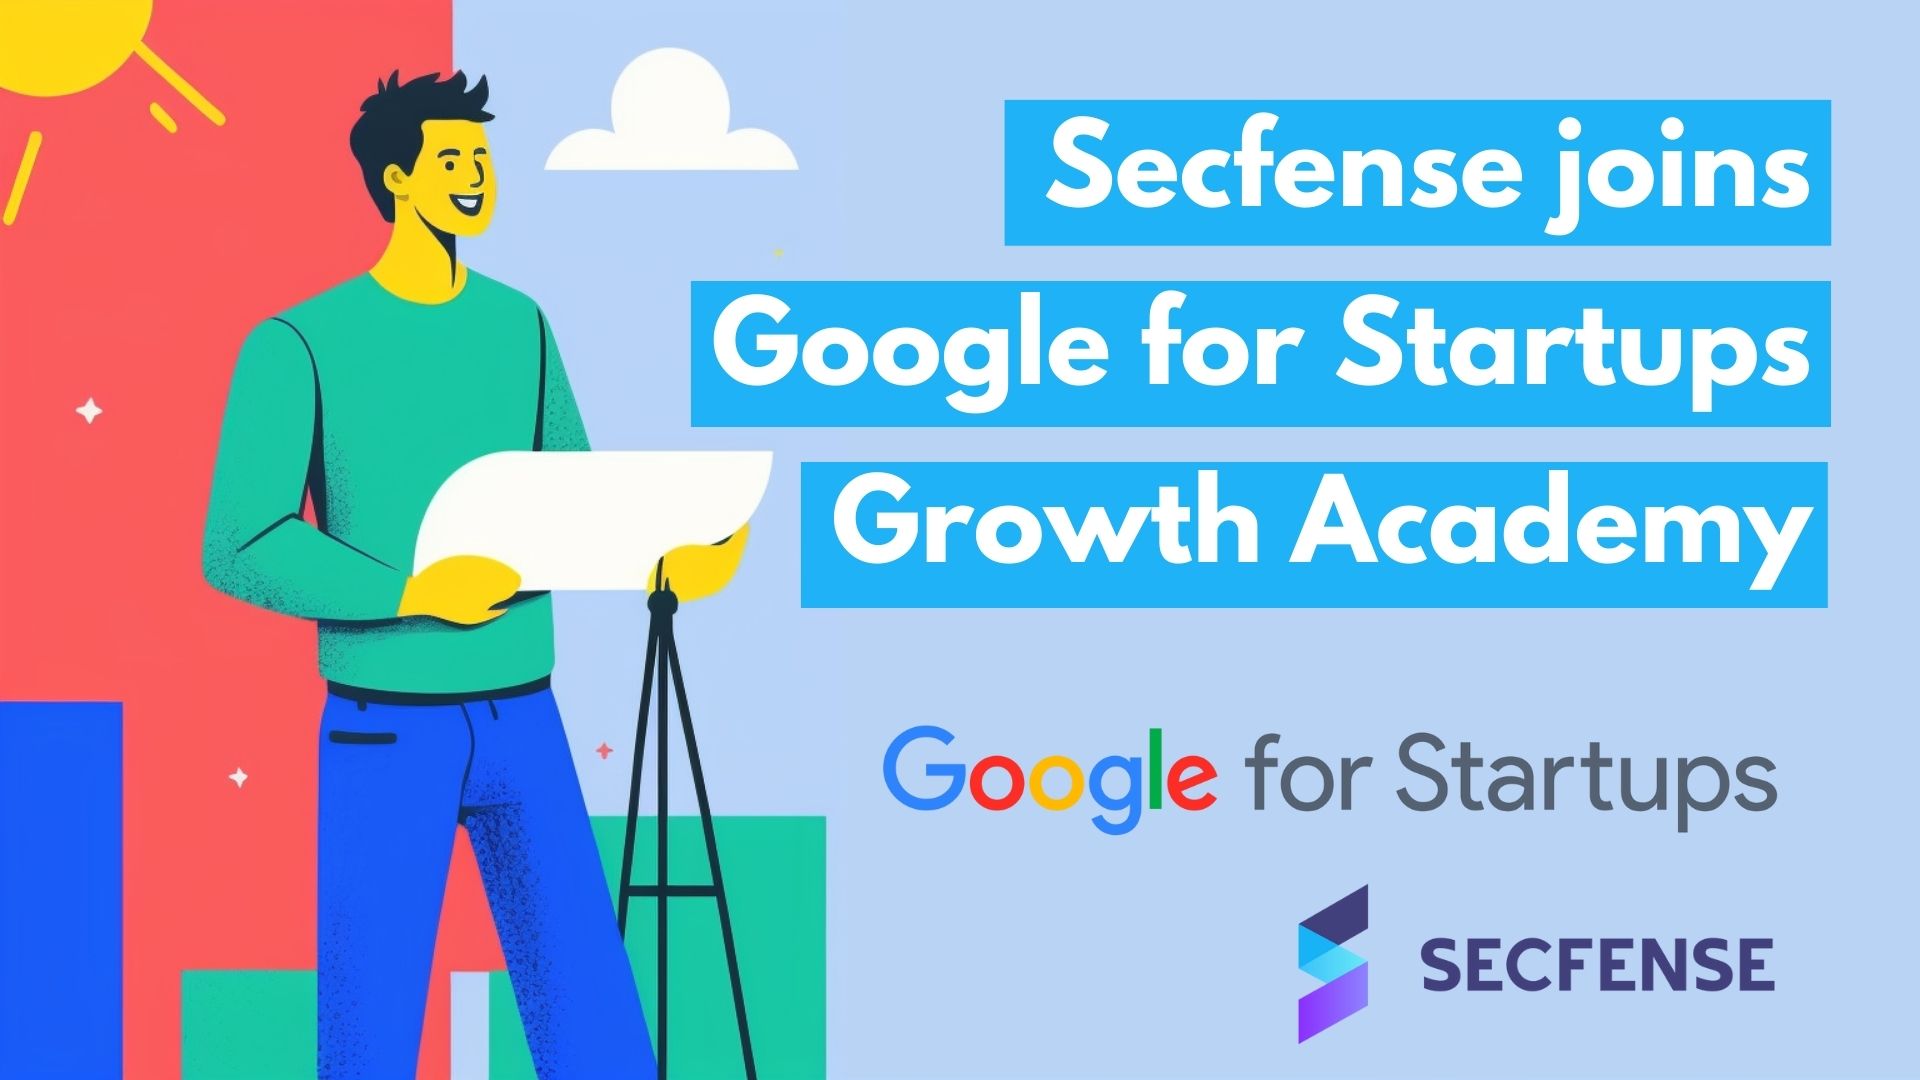 Secfense founders join Google for Startups Growth Academy: Cybersecurity program.